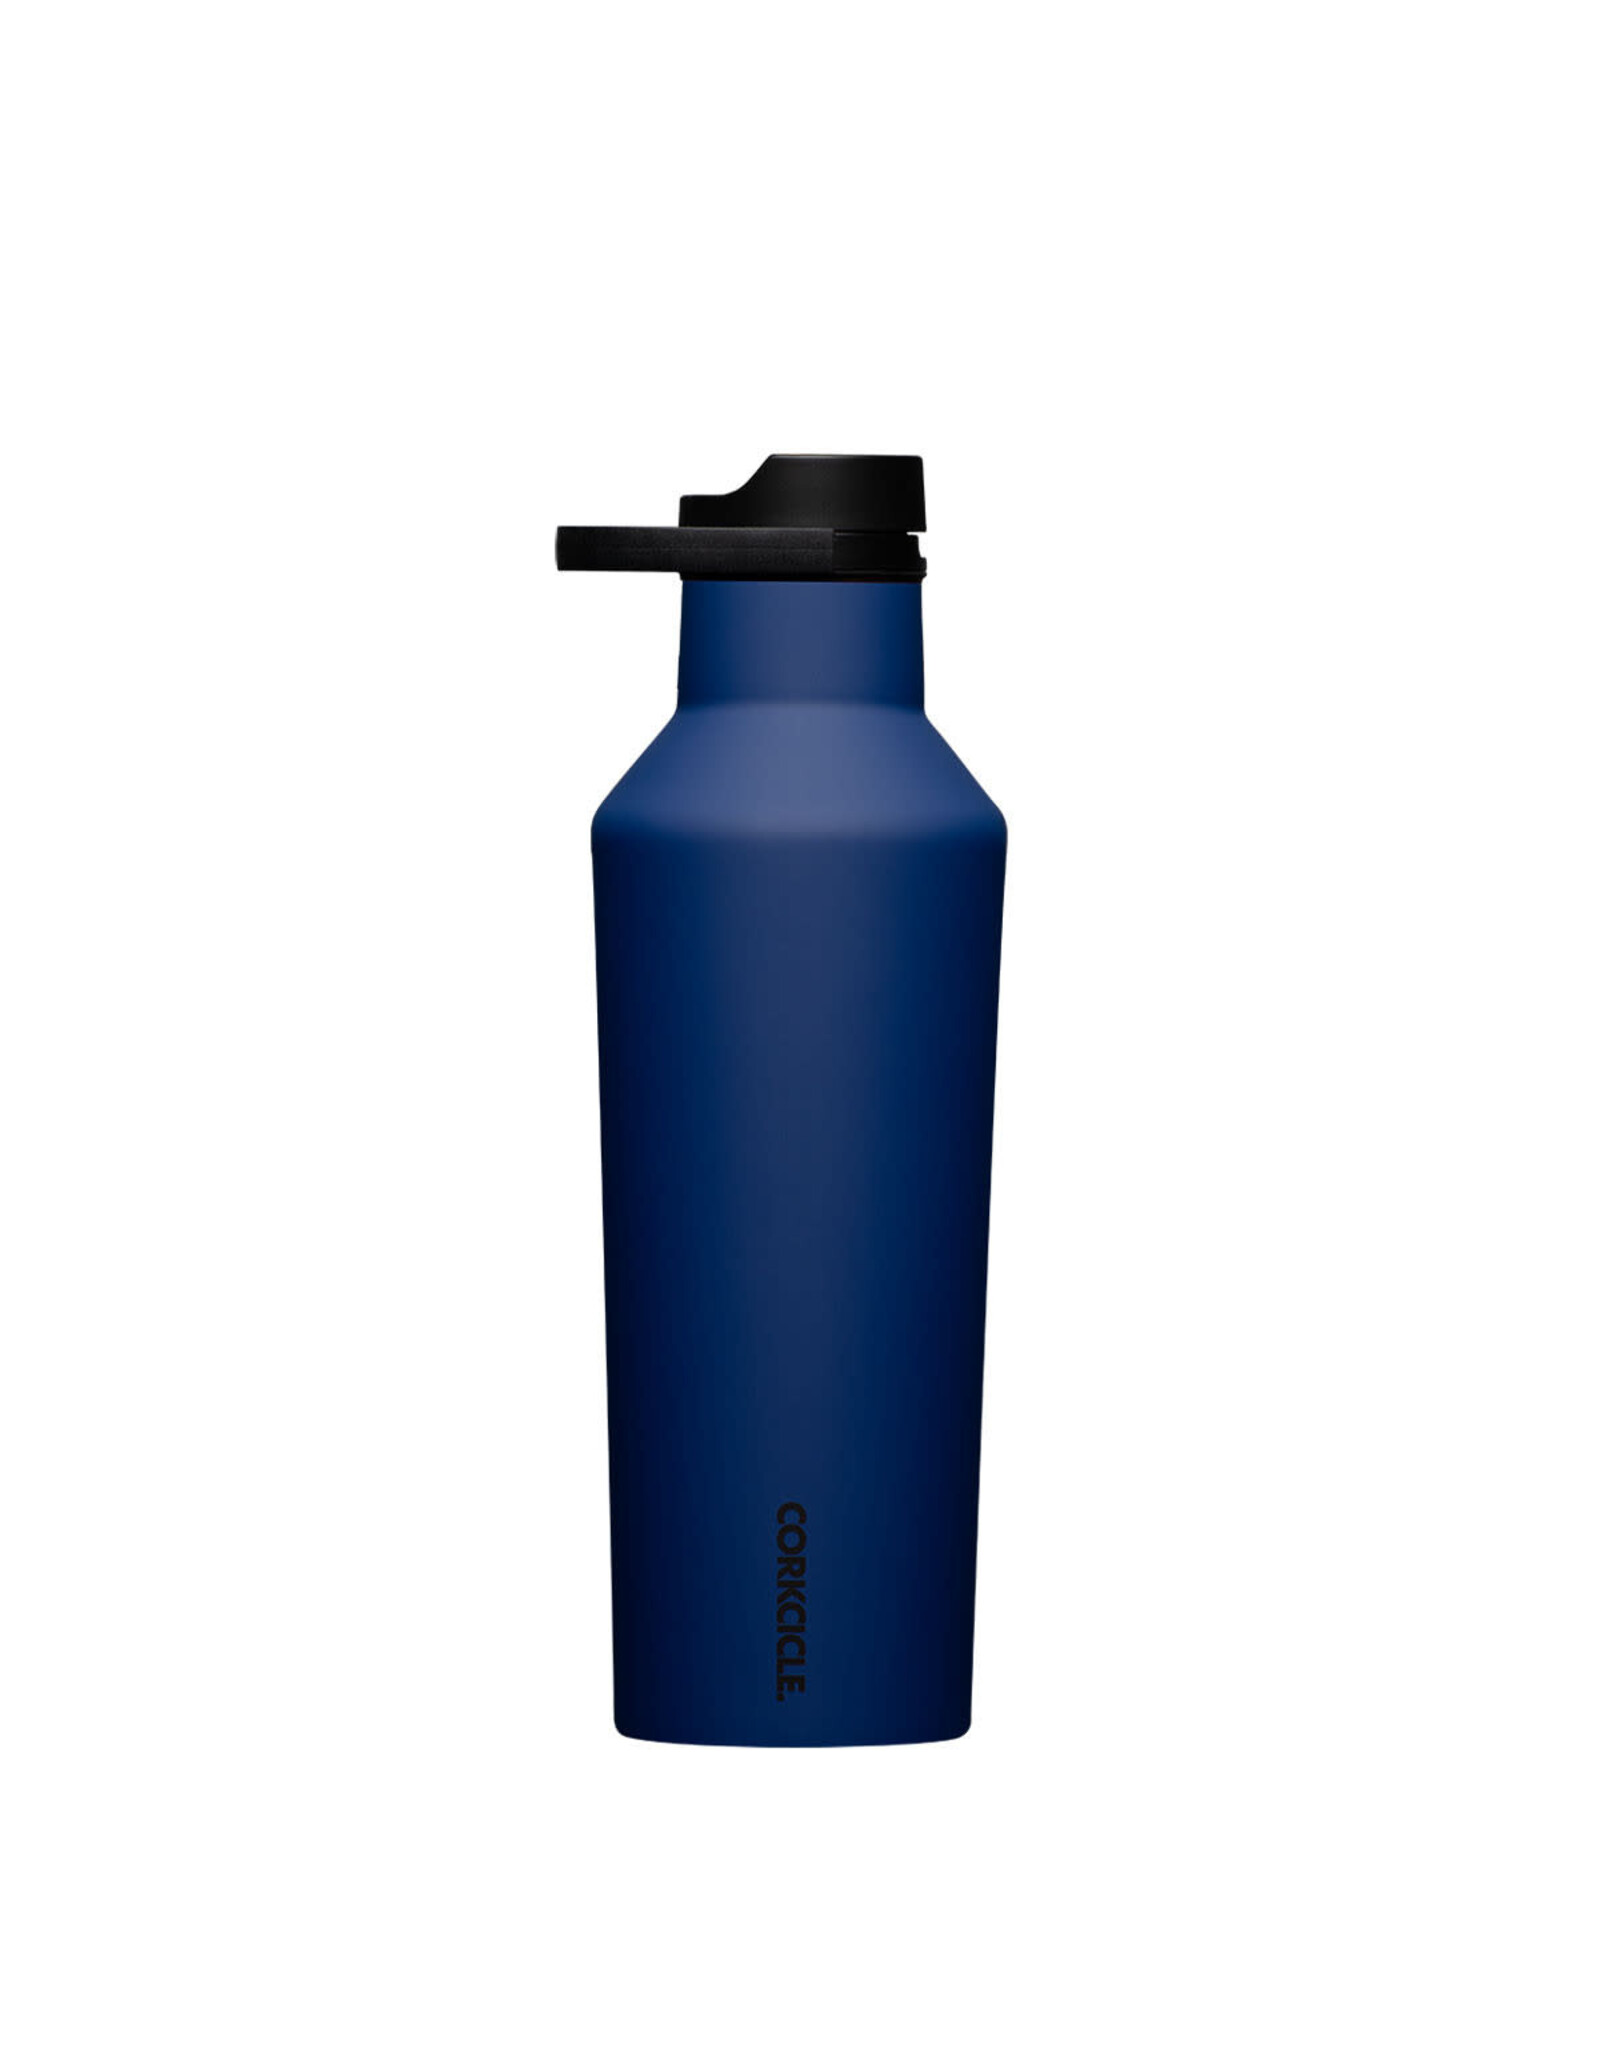 Corkcicle Sport Canteen - 32oz Midnight Navy